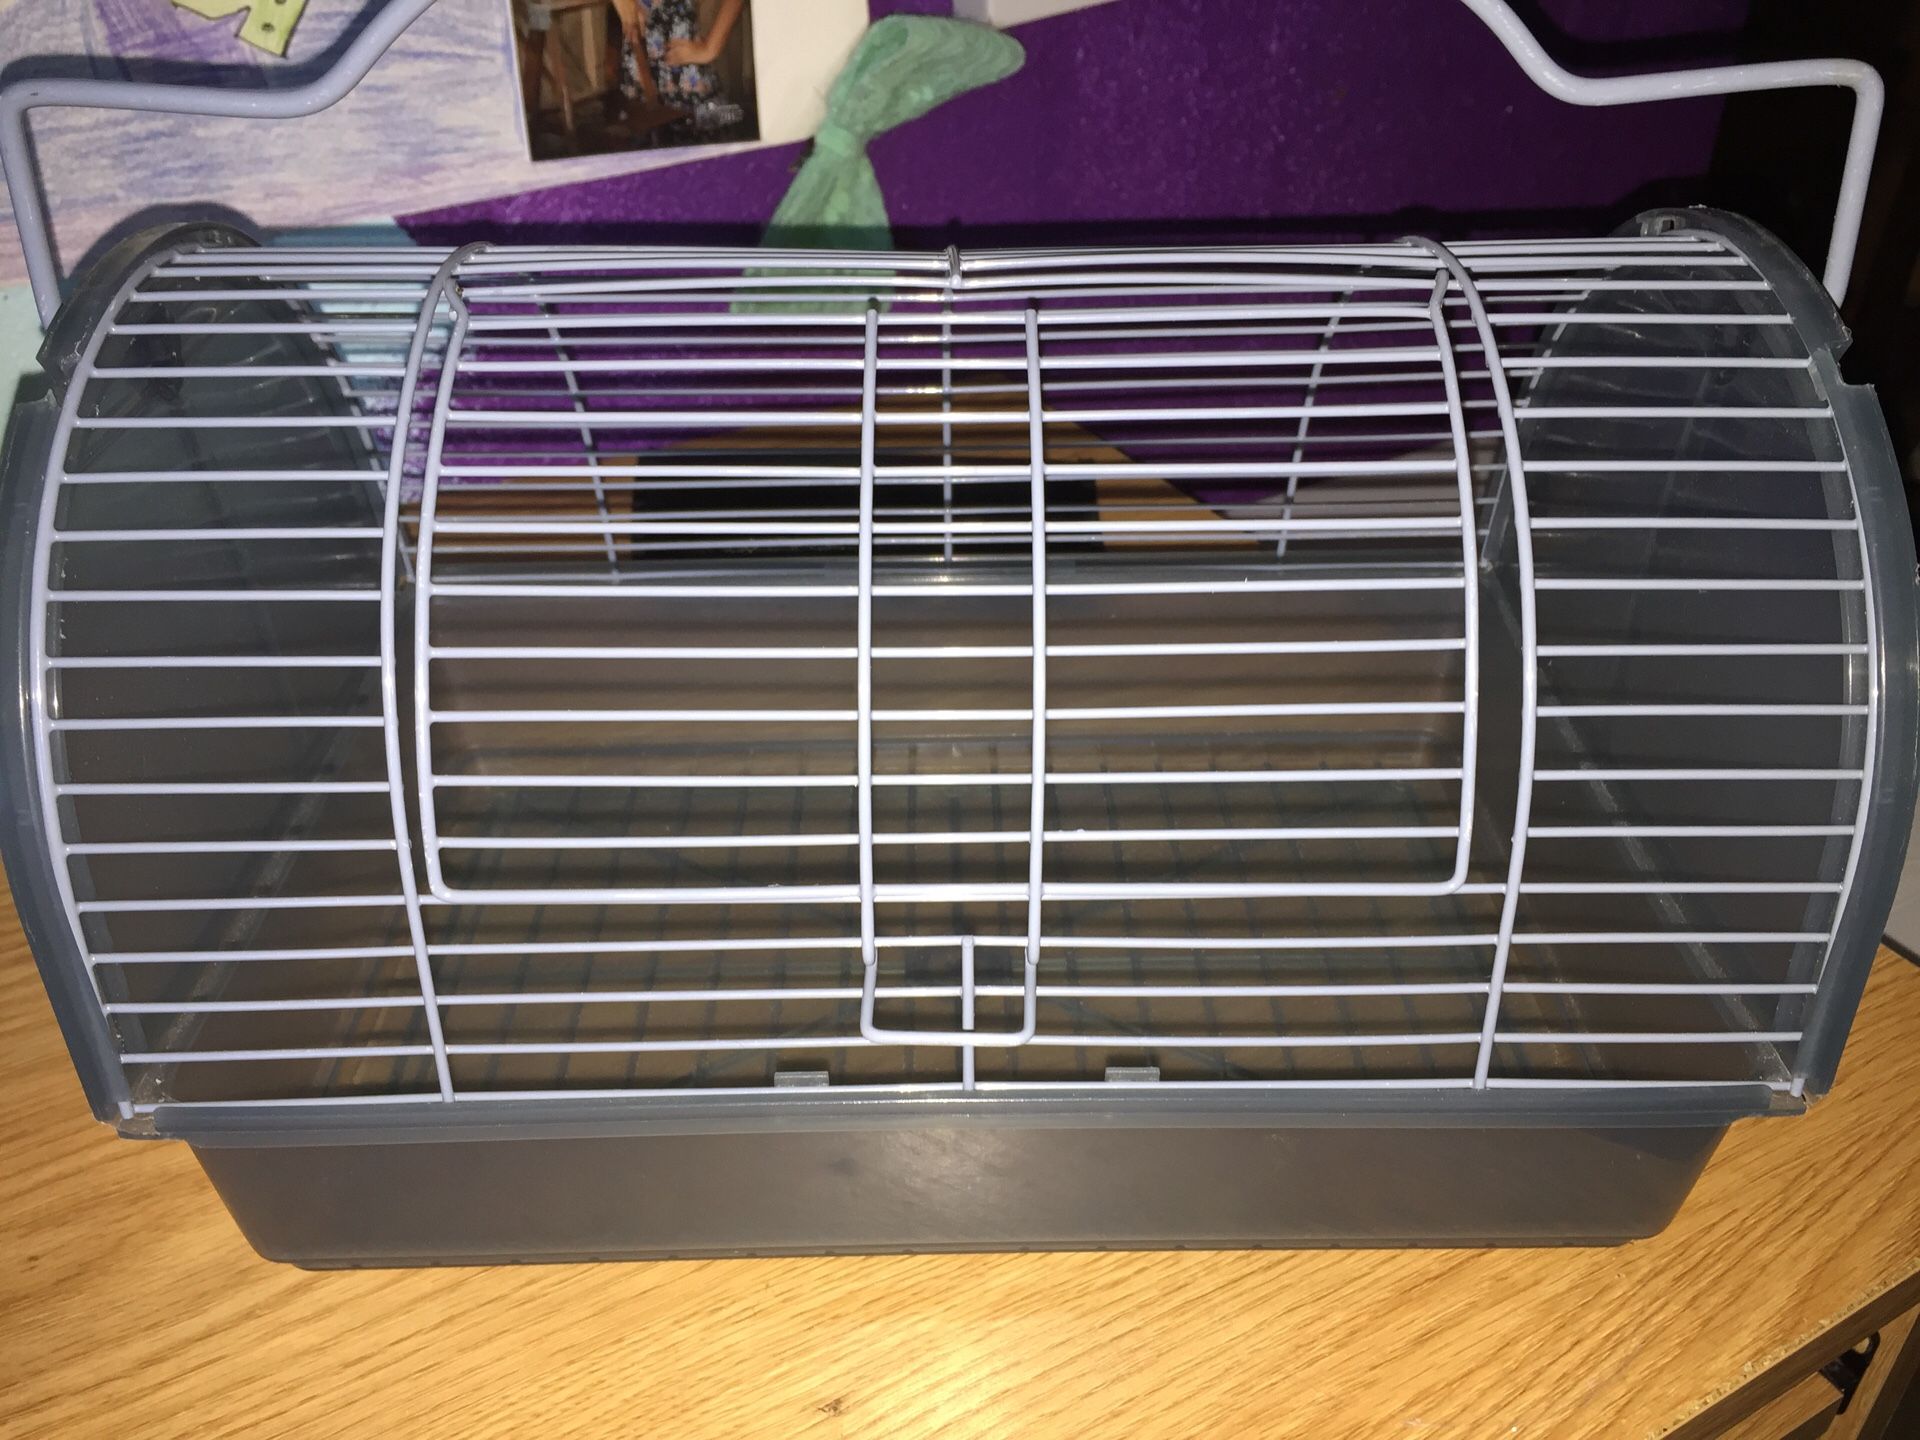 Hamster to go cage